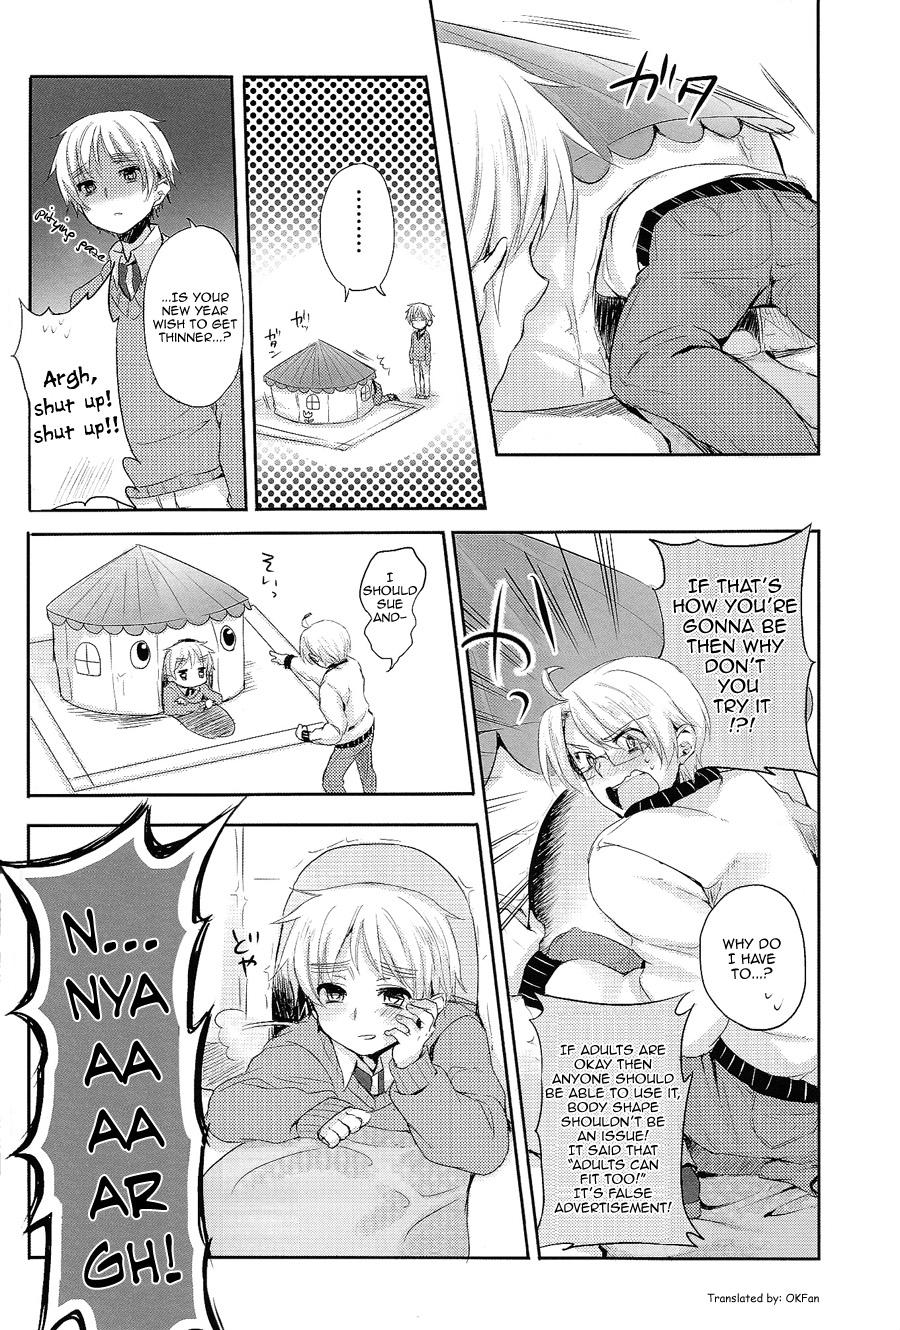 Office Sex Hide and eat - Axis powers hetalia Off - Page 7